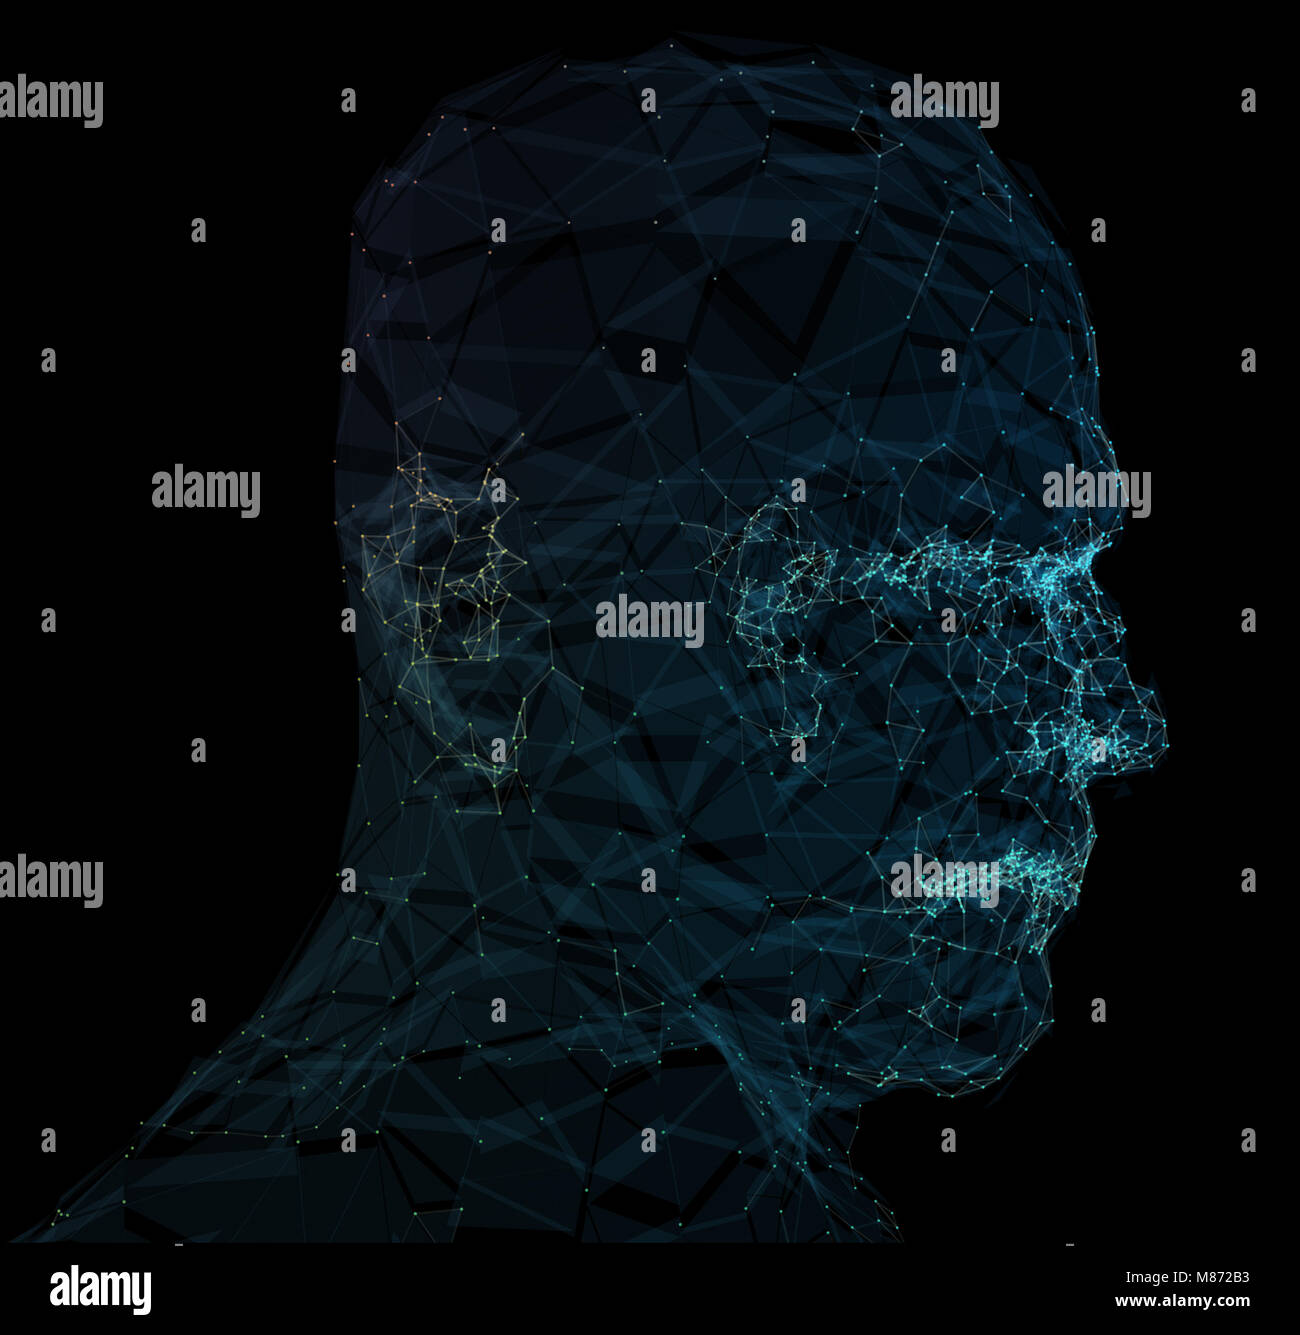 Human head with in 3d space network. Blue abstract futuristic medicine, science and technology background illustration. 3D rendering. Stock Photo